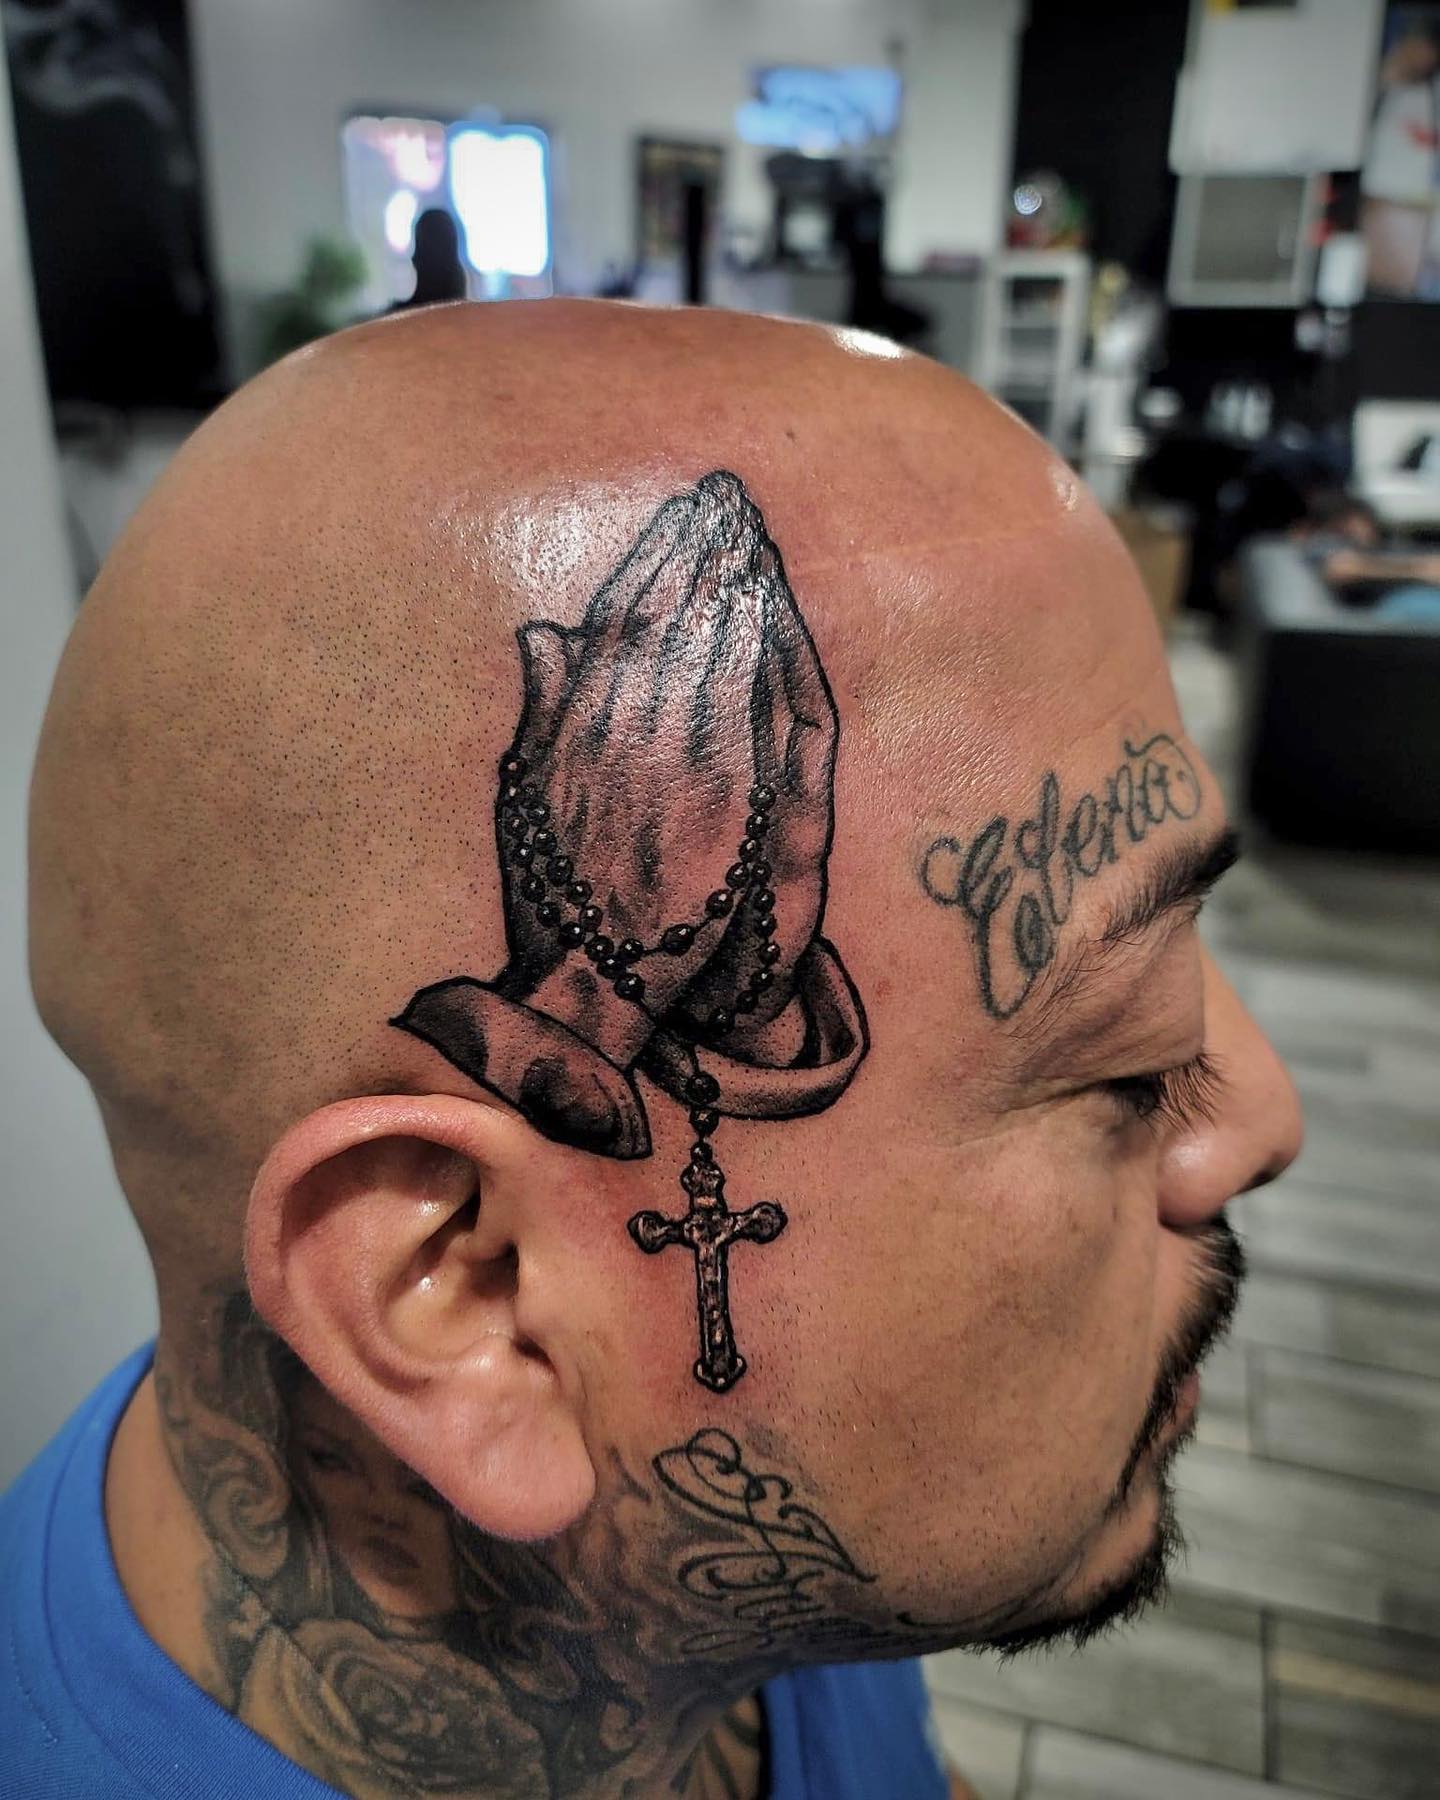 If you are one of the people who don't hesitate to get a tattoo on head, you can go with that tattoo. It takes courage to get it, but it is worth trying.